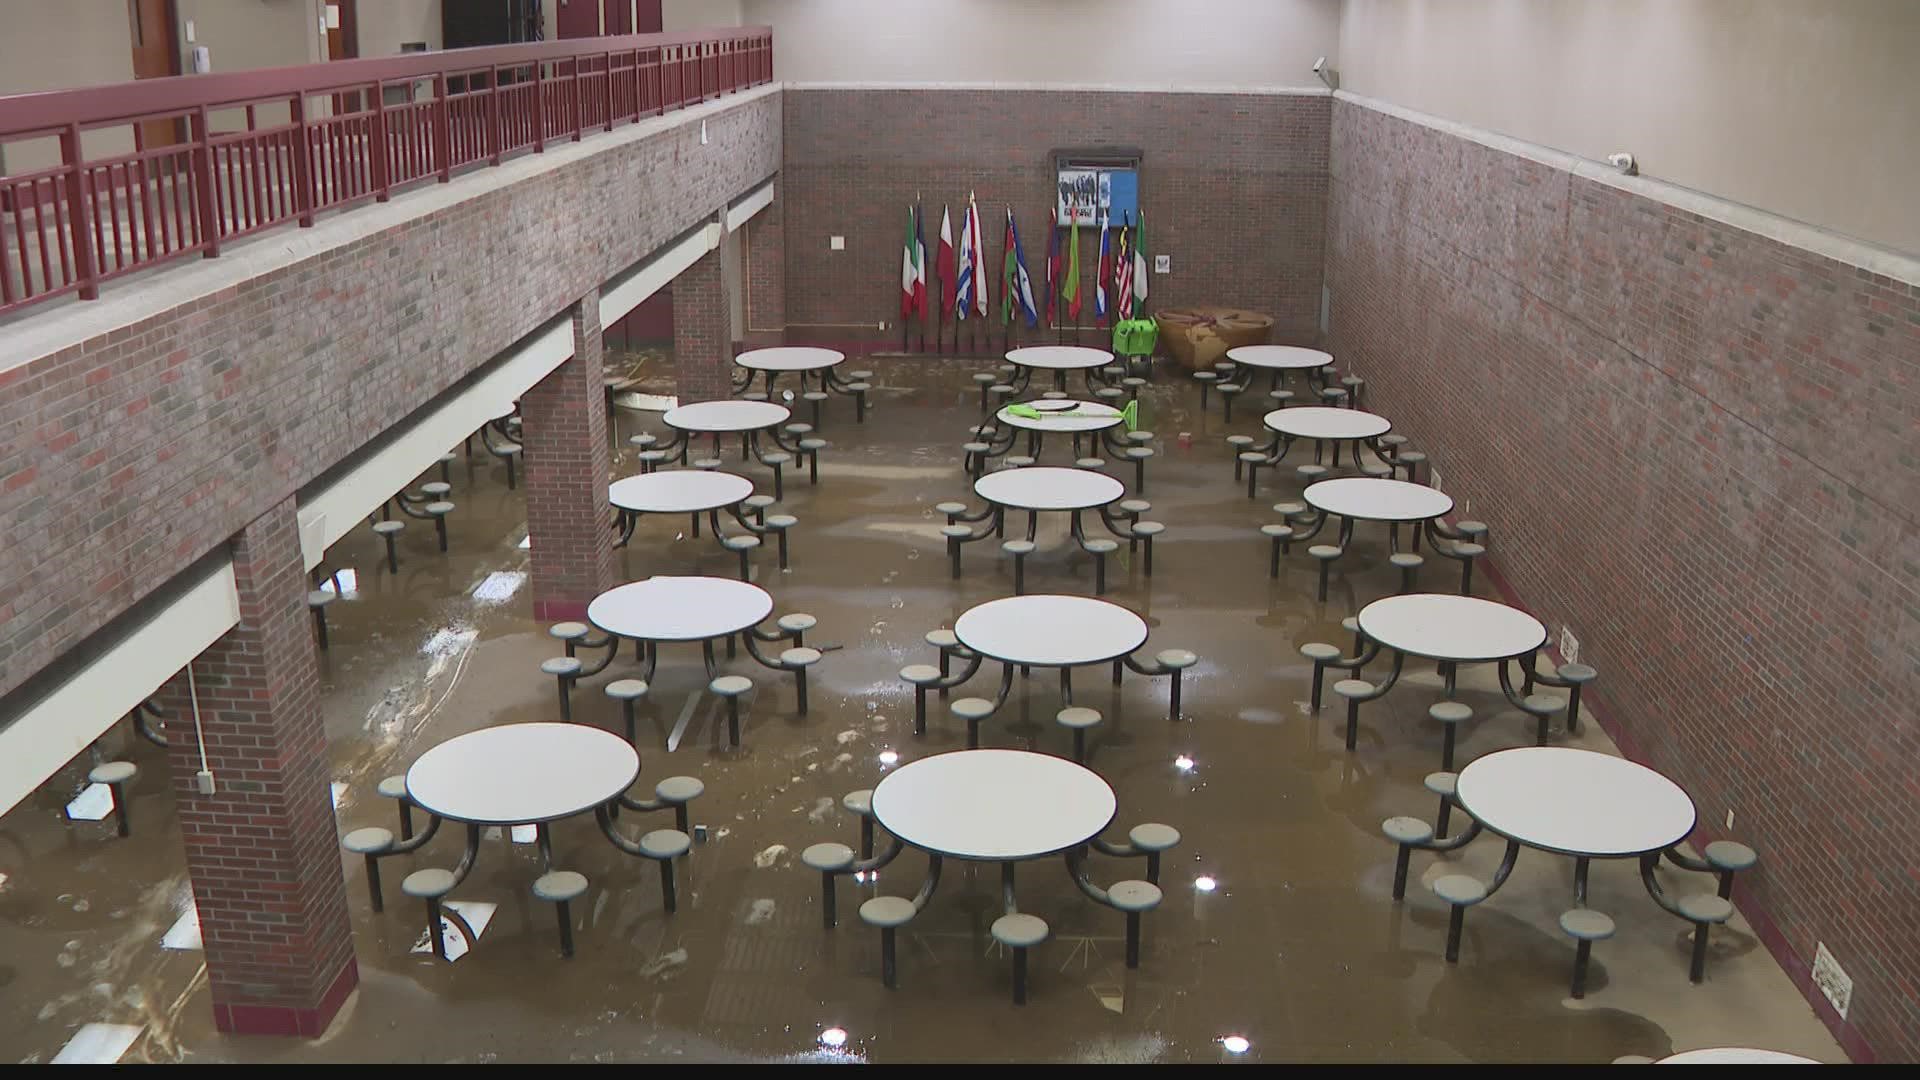 Thursday's flooding completely submerged cafeteria chairs at Soldan High School.